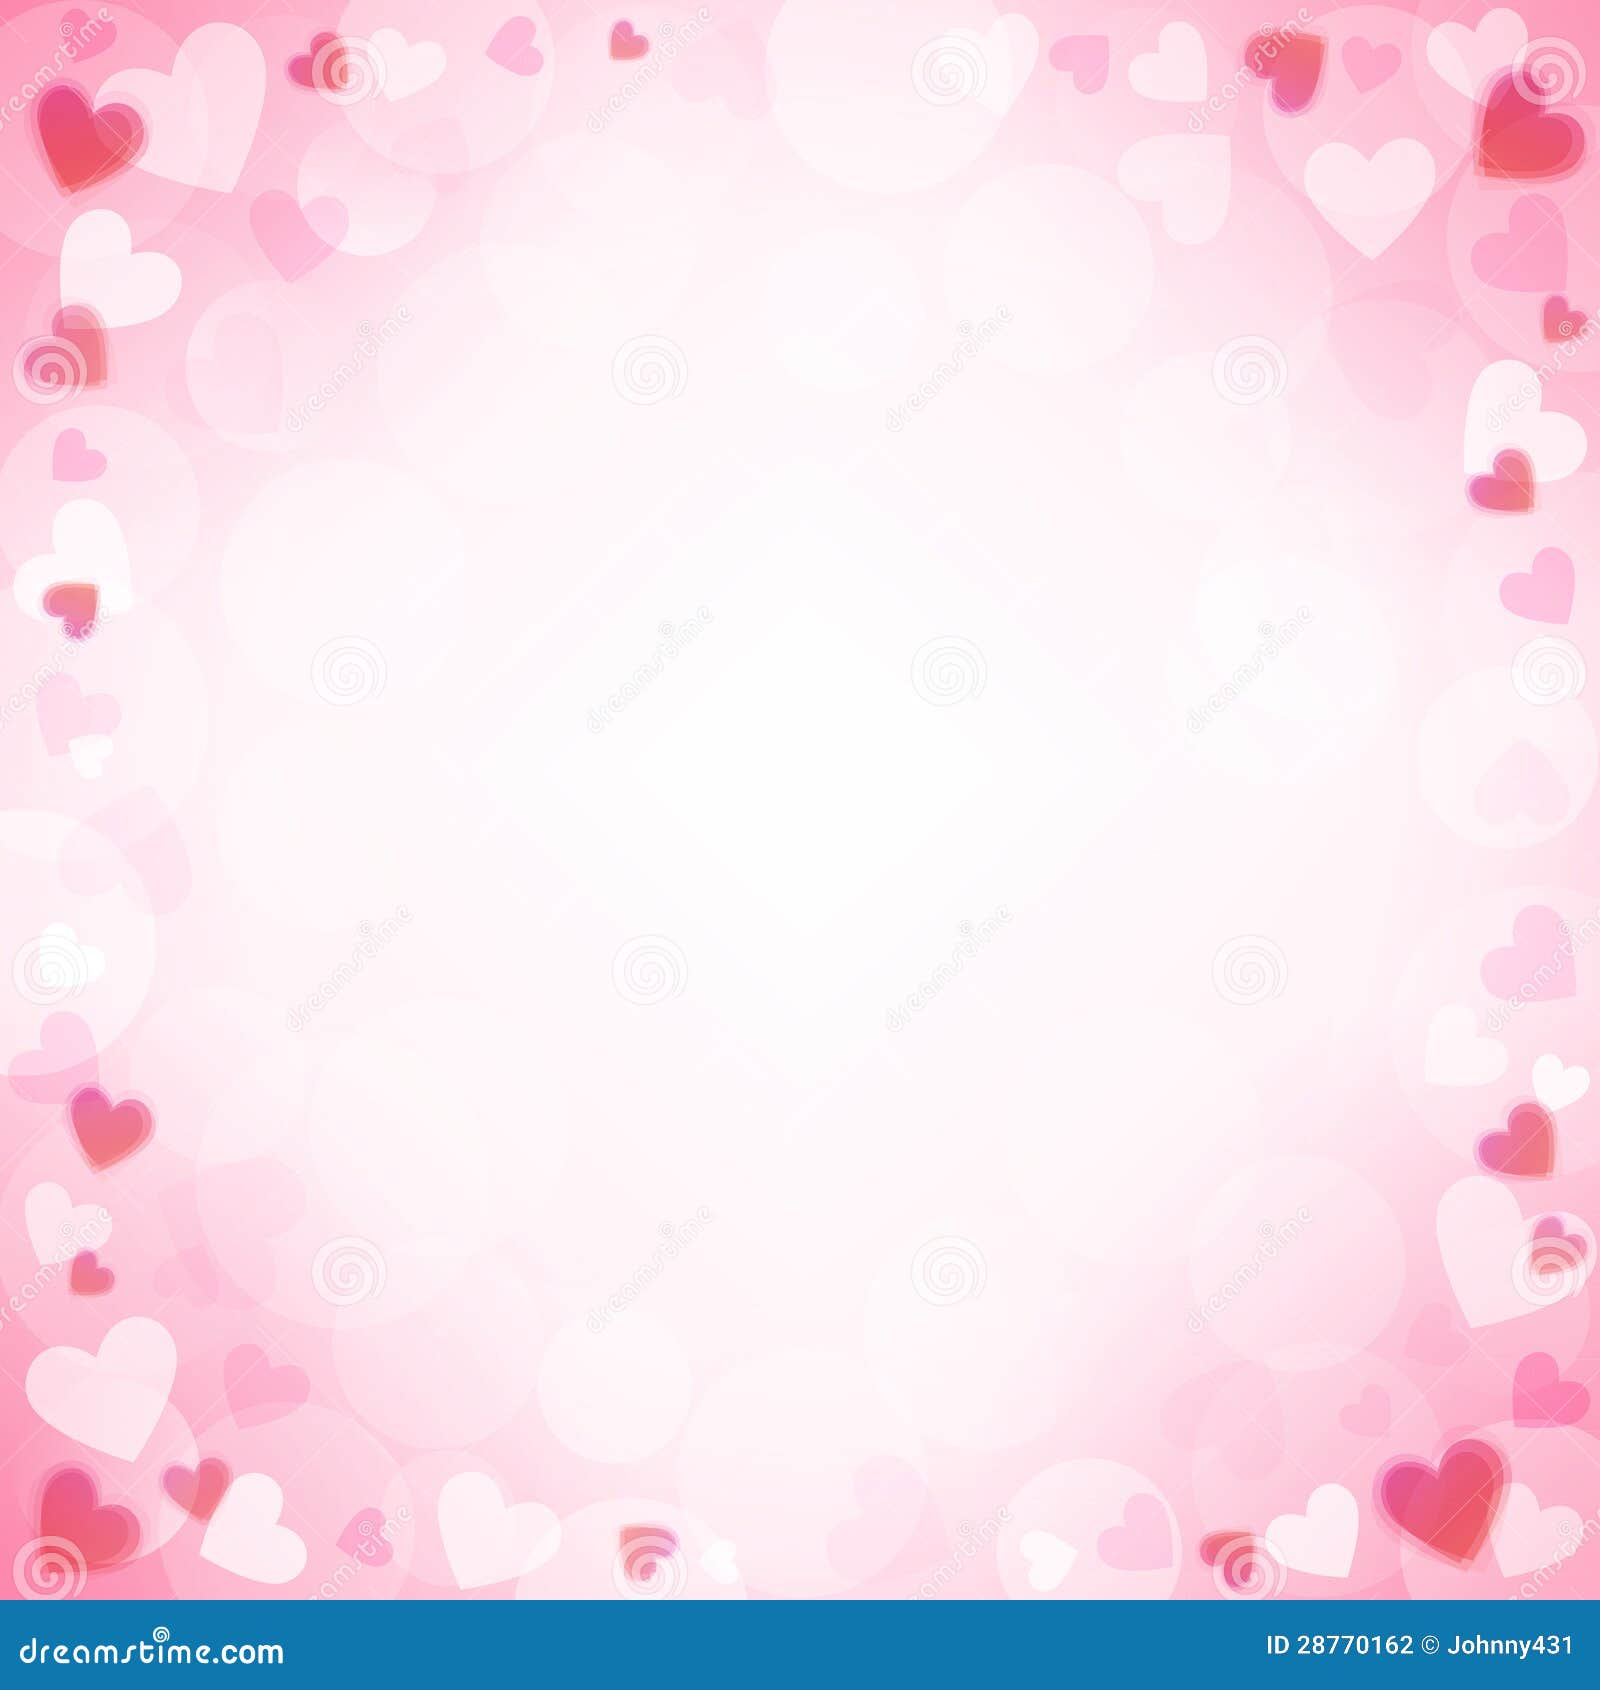 Background with Pink Hearts Stock Vector - Illustration of heart, retro:  28770162